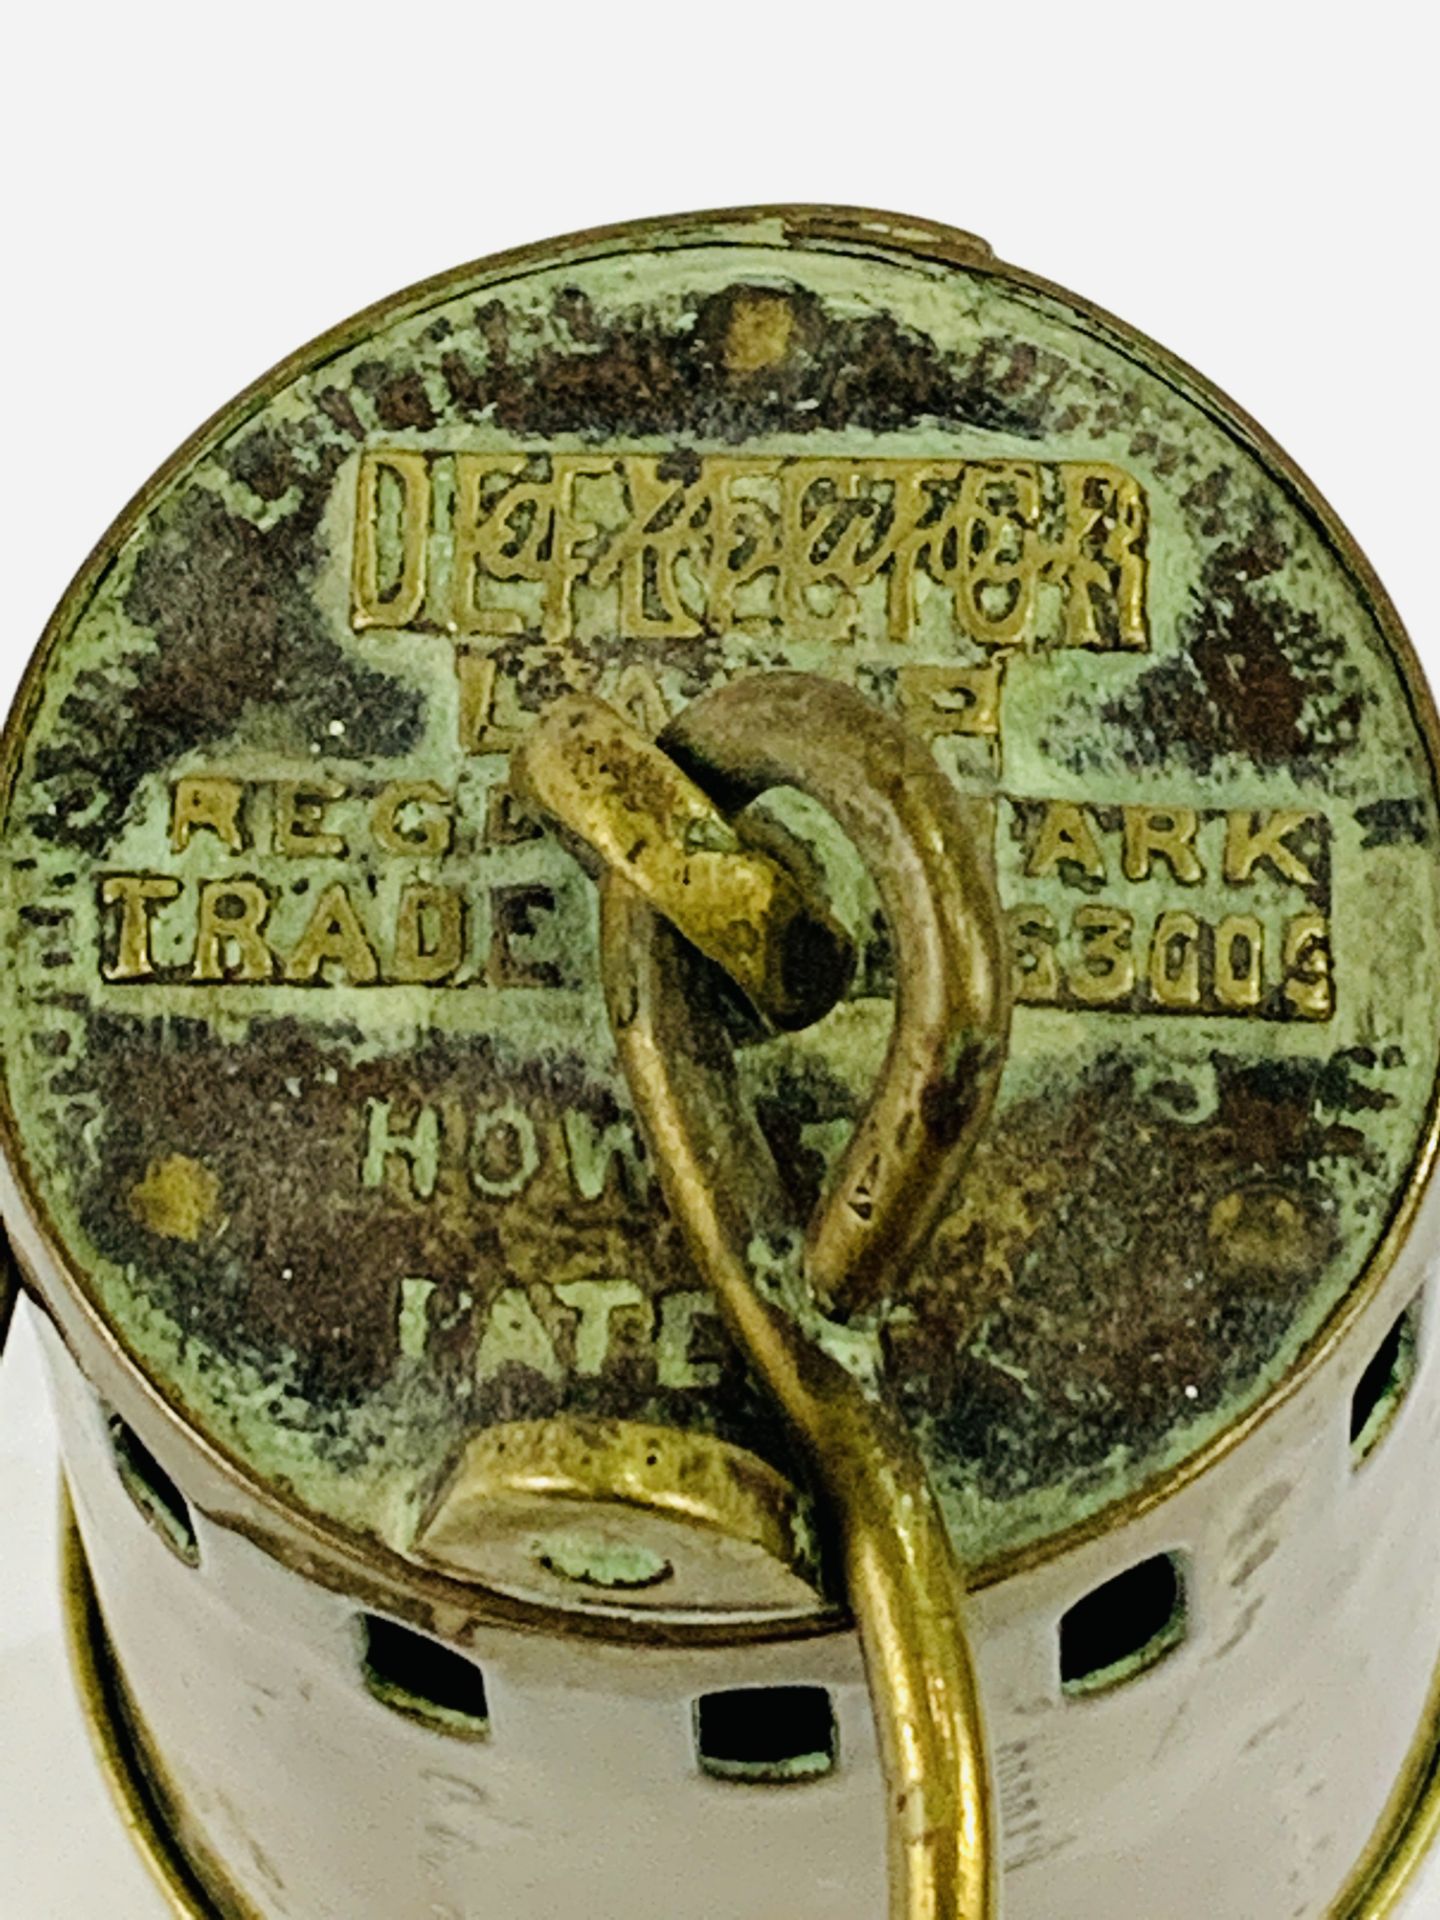 Brass and steel Howat's Patent Deflector Safety Lamp - Image 3 of 4